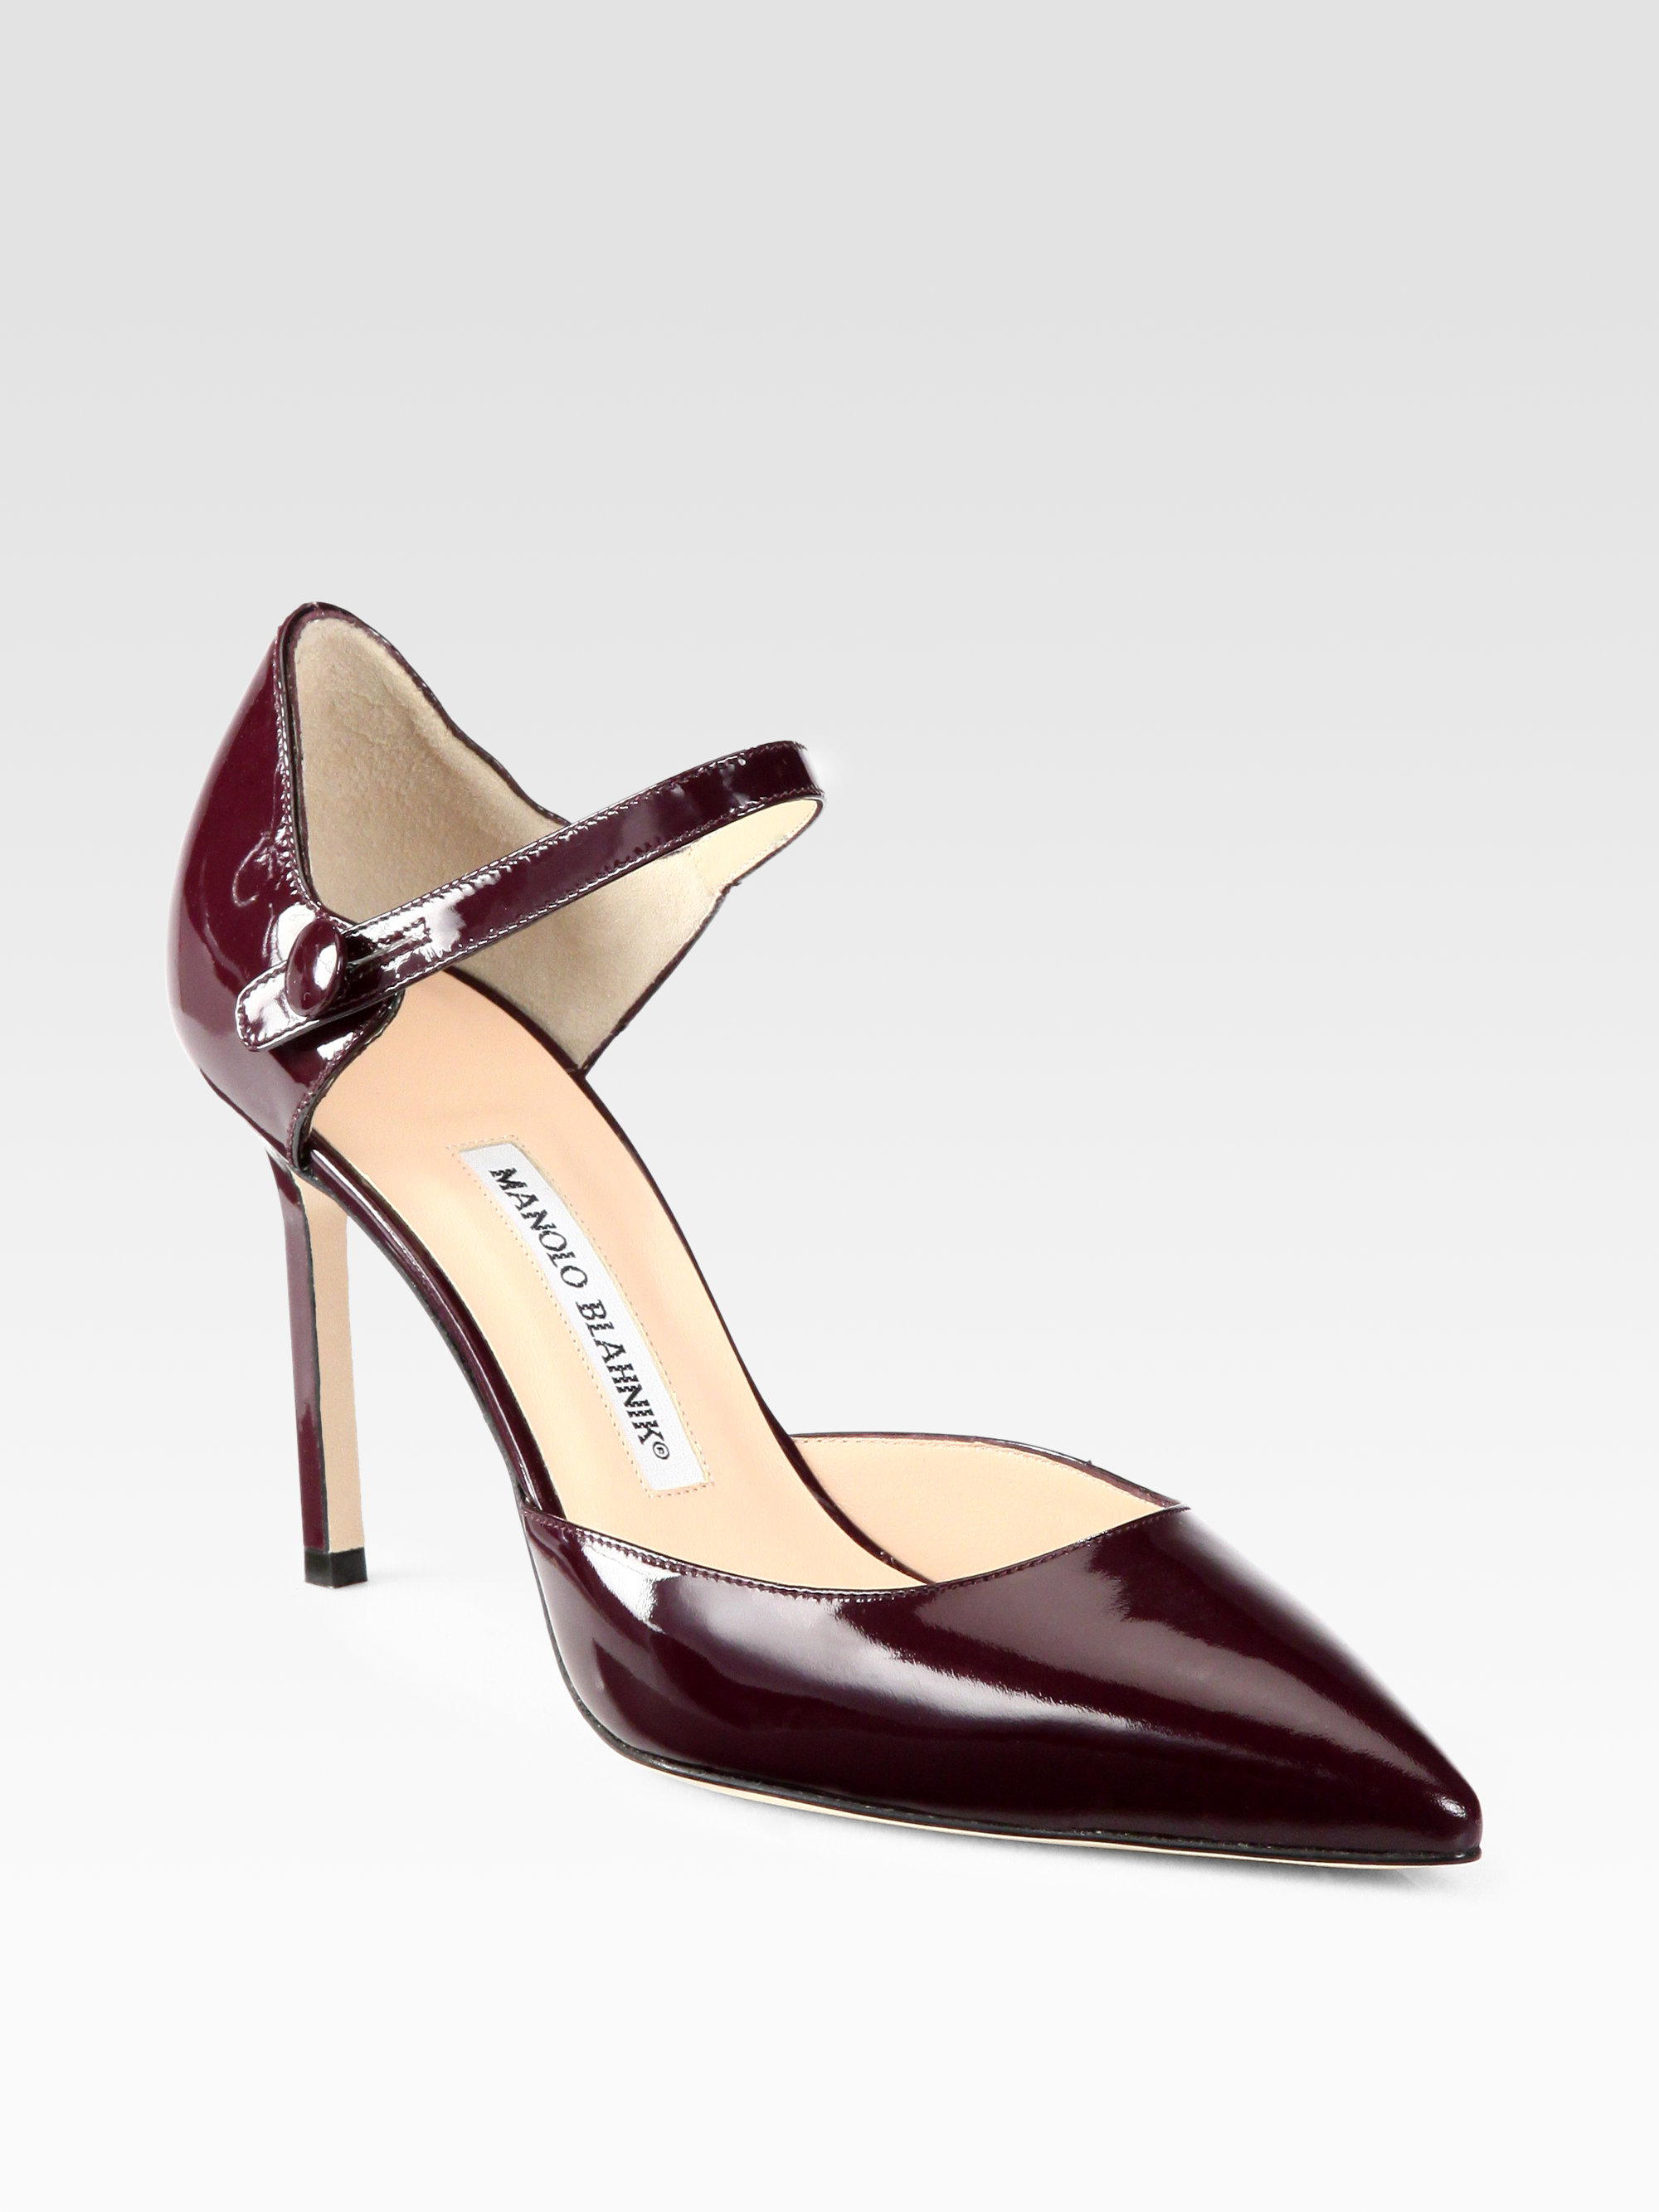 Manolo blahnik Norvany Patent Leather Mary Jane Pumps in Purple | Lyst